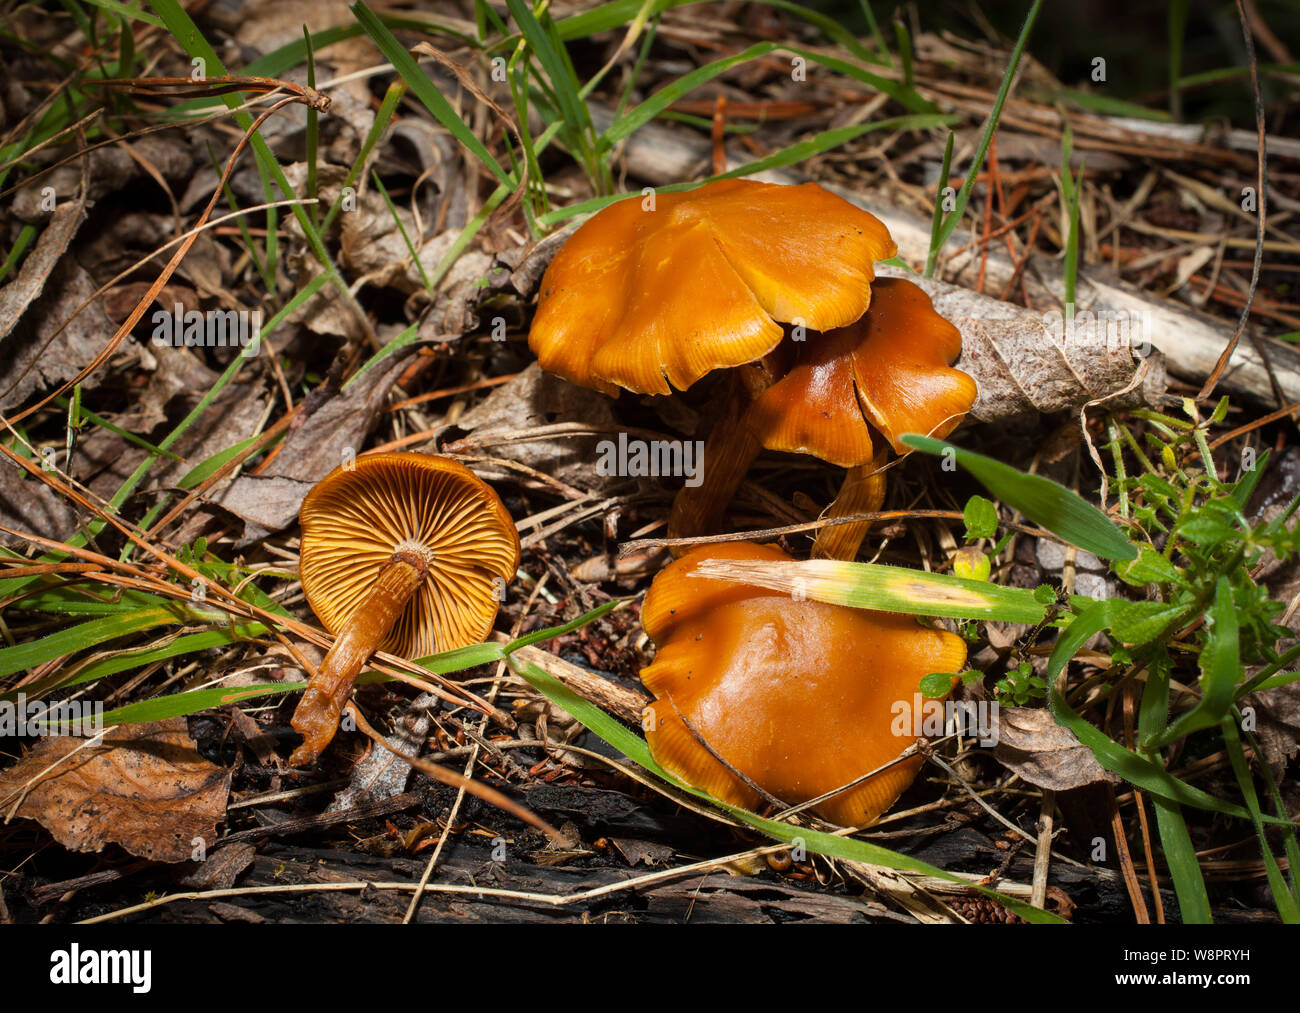 A Look at life in New Zealand: Foraging for wild food: Galerina marginata: Deadly Poisonous: Mid-winter fungi. Stock Photo